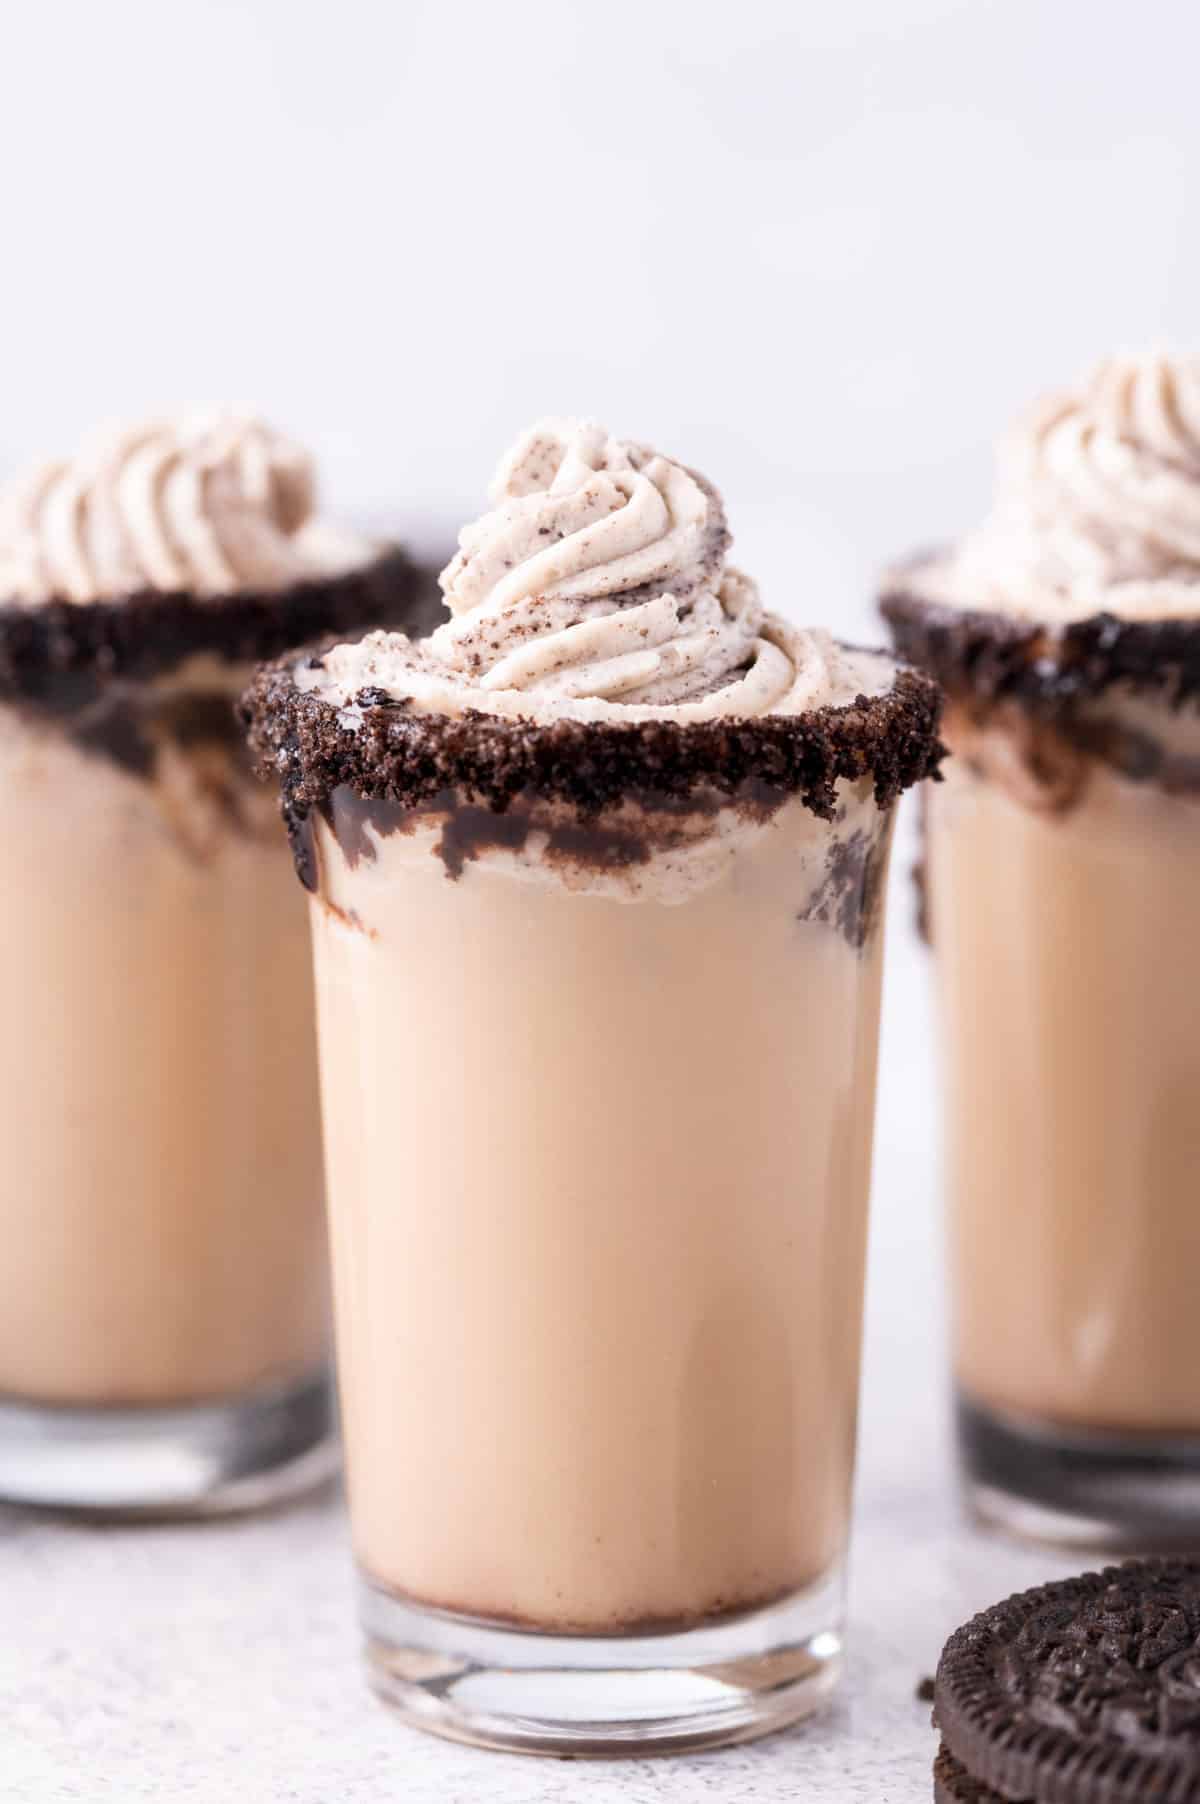 https://forktospoon.com/wp-content/uploads/2021/08/Oreo-Cookies-and-Cream-Shooters-SET-2-17-scaled.jpg